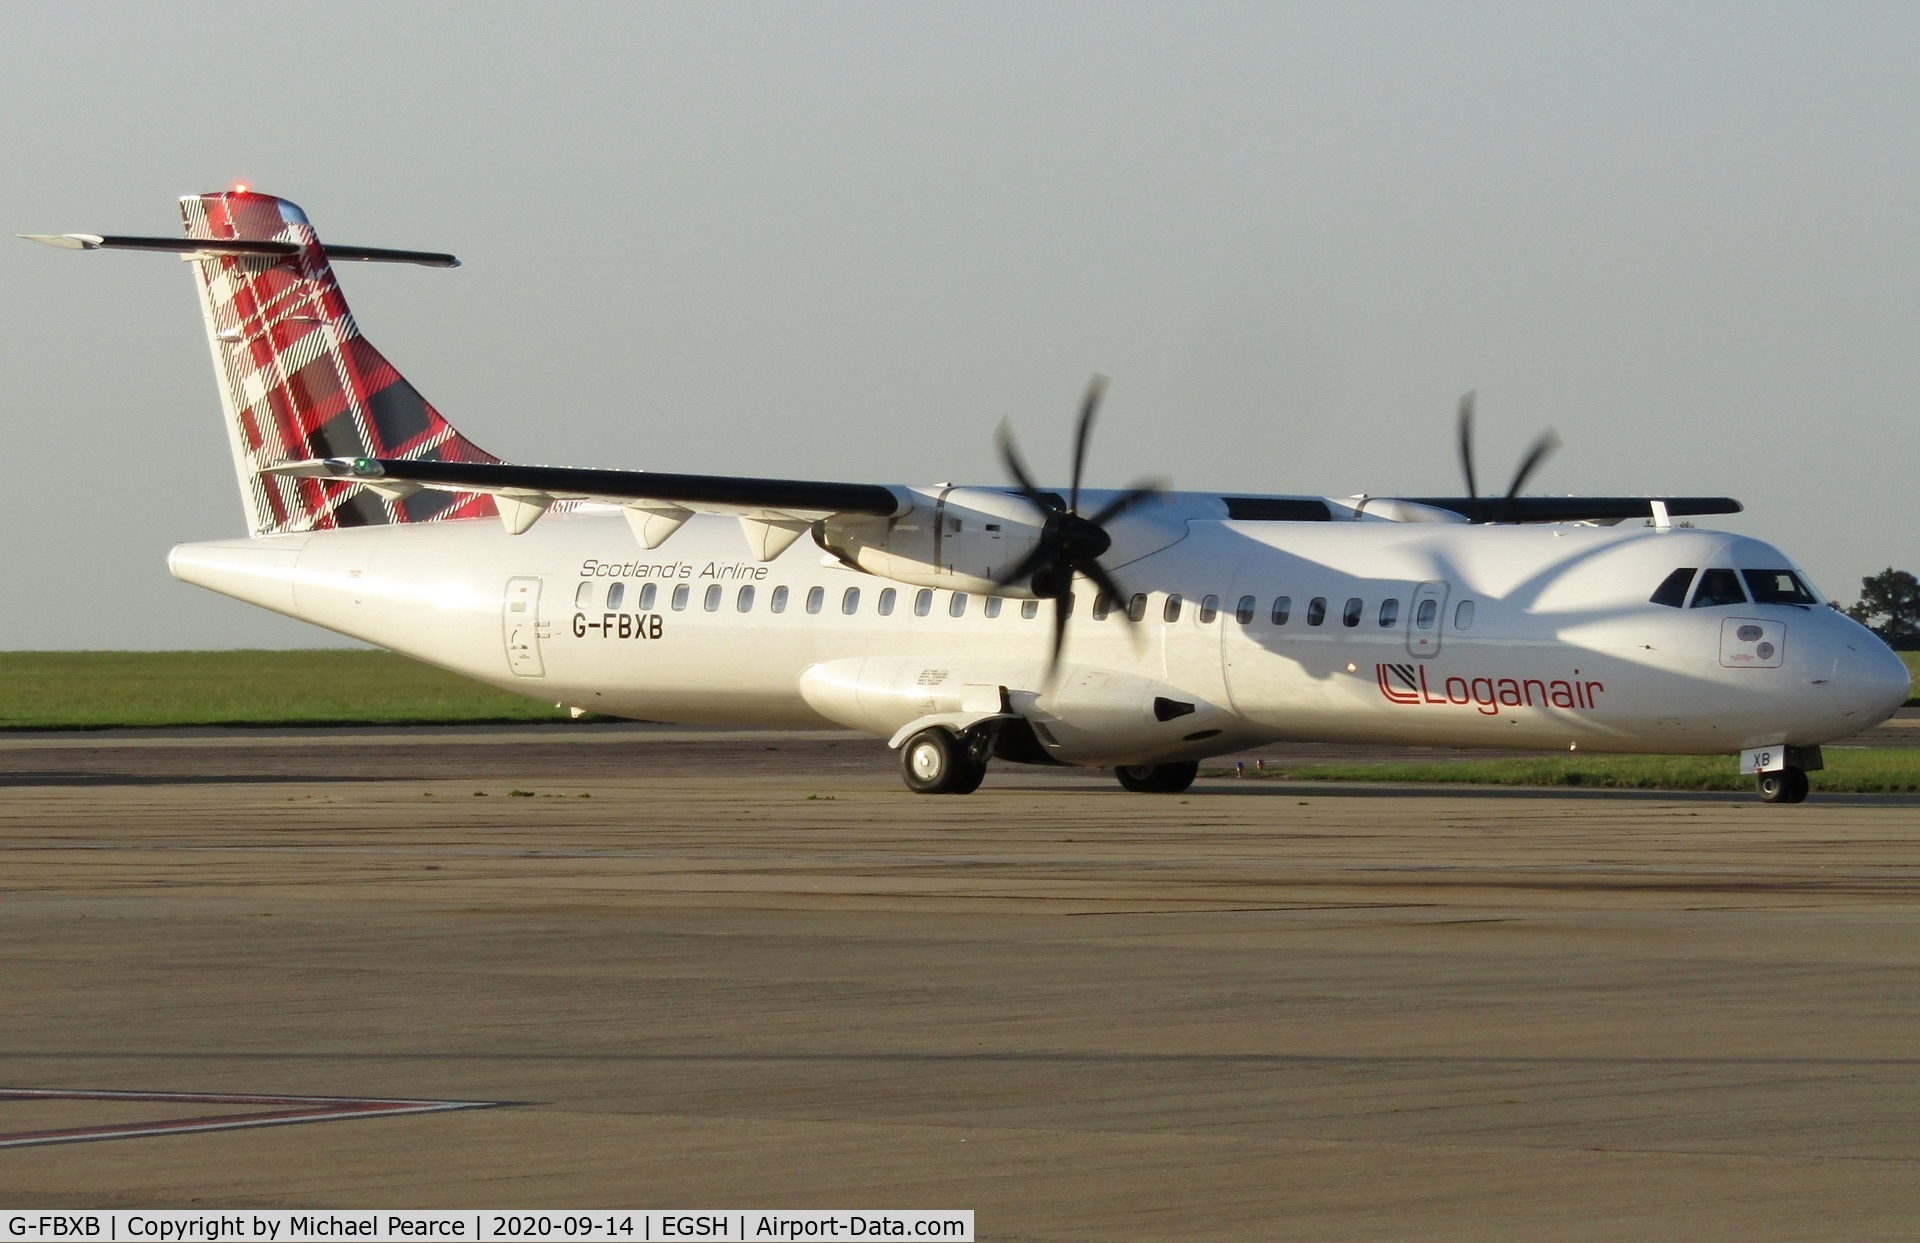 G-FBXB, 2015 ATR 72-212A C/N 1277, Arriving on Stand 2 from Aberdeen (ABZ).